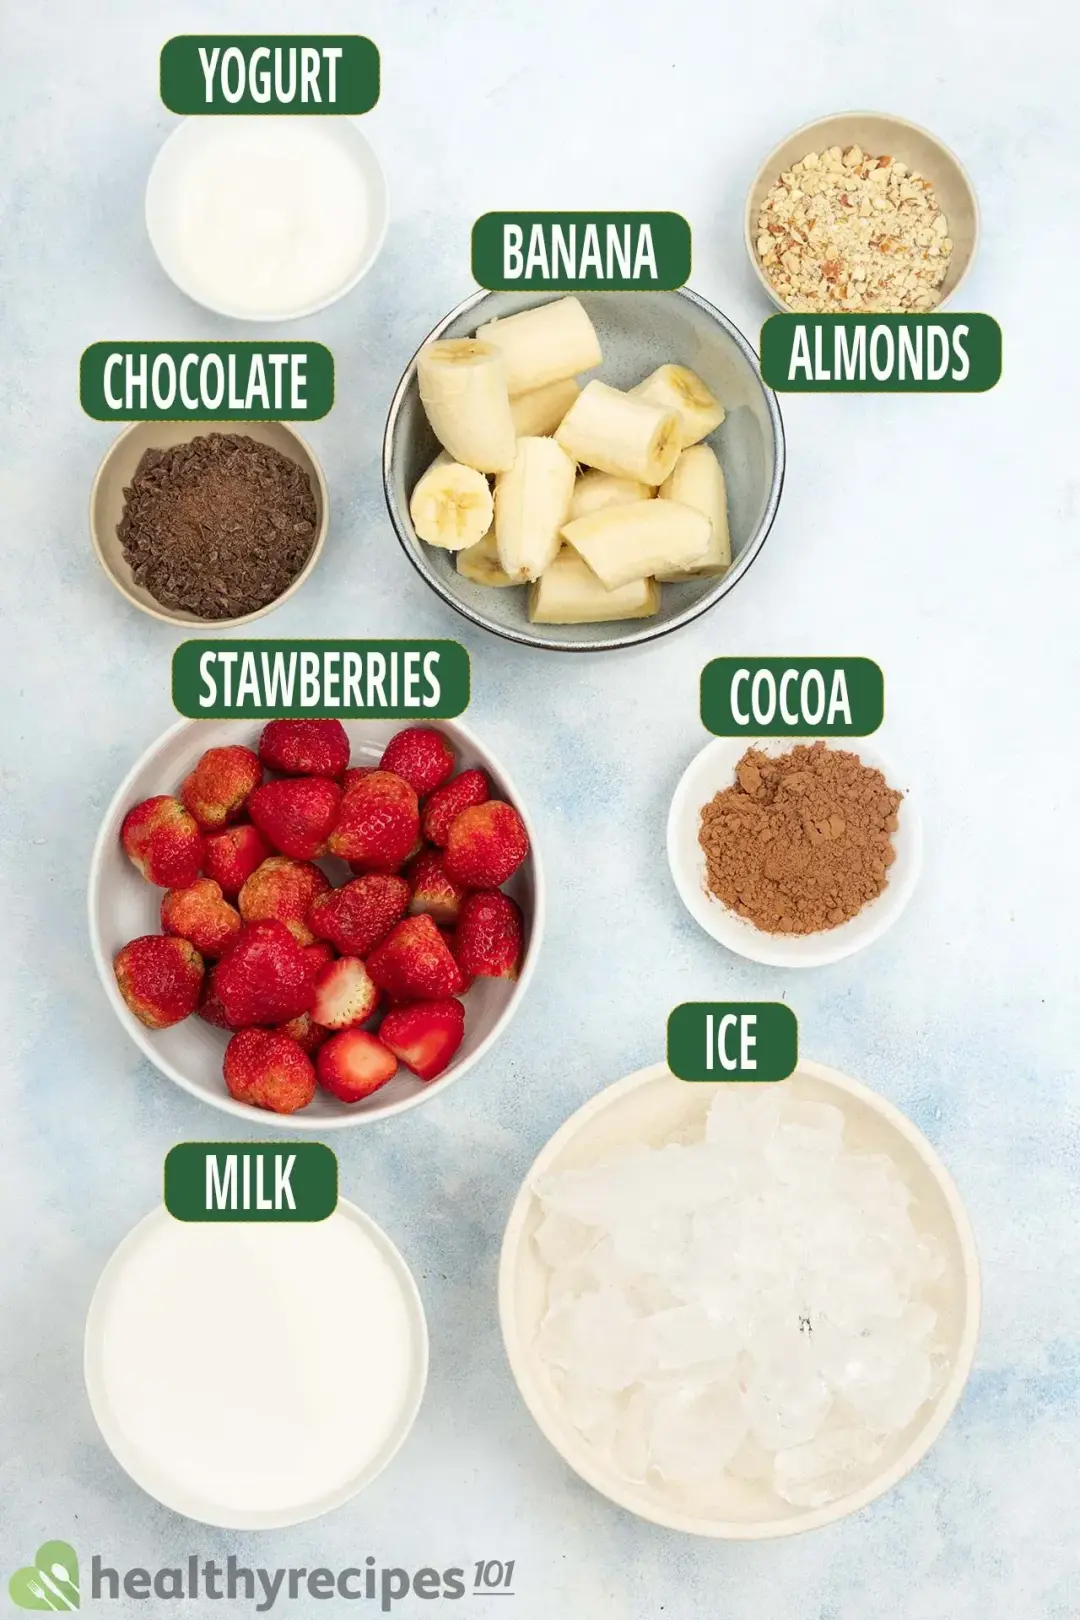 Ingredients for Chocolate Strawberry Smoothie